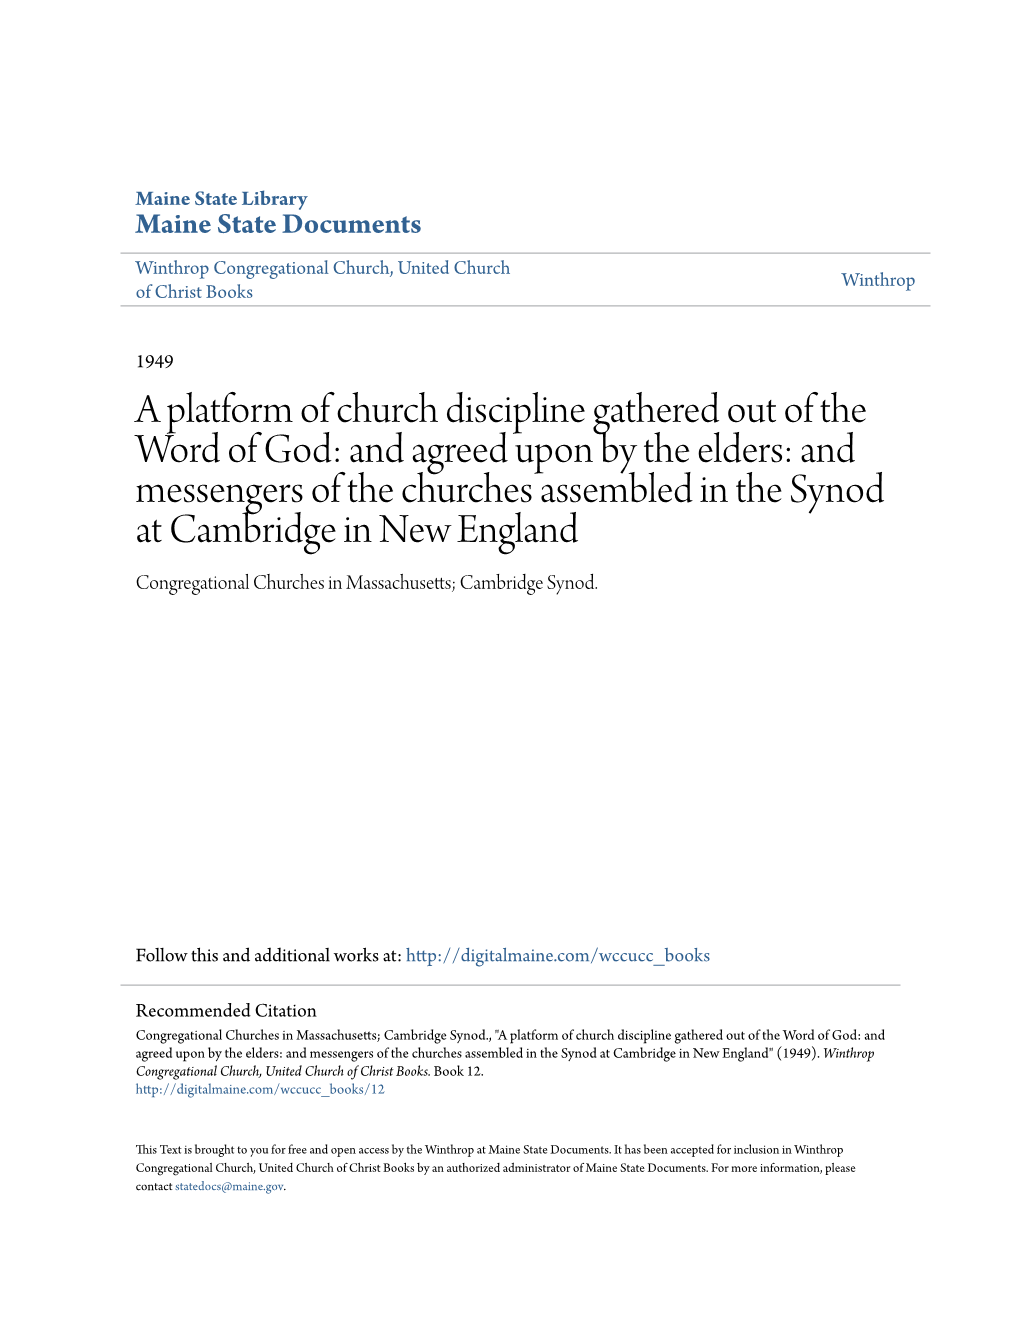 A Platform of Church Discipline Gathered out of the Word of God